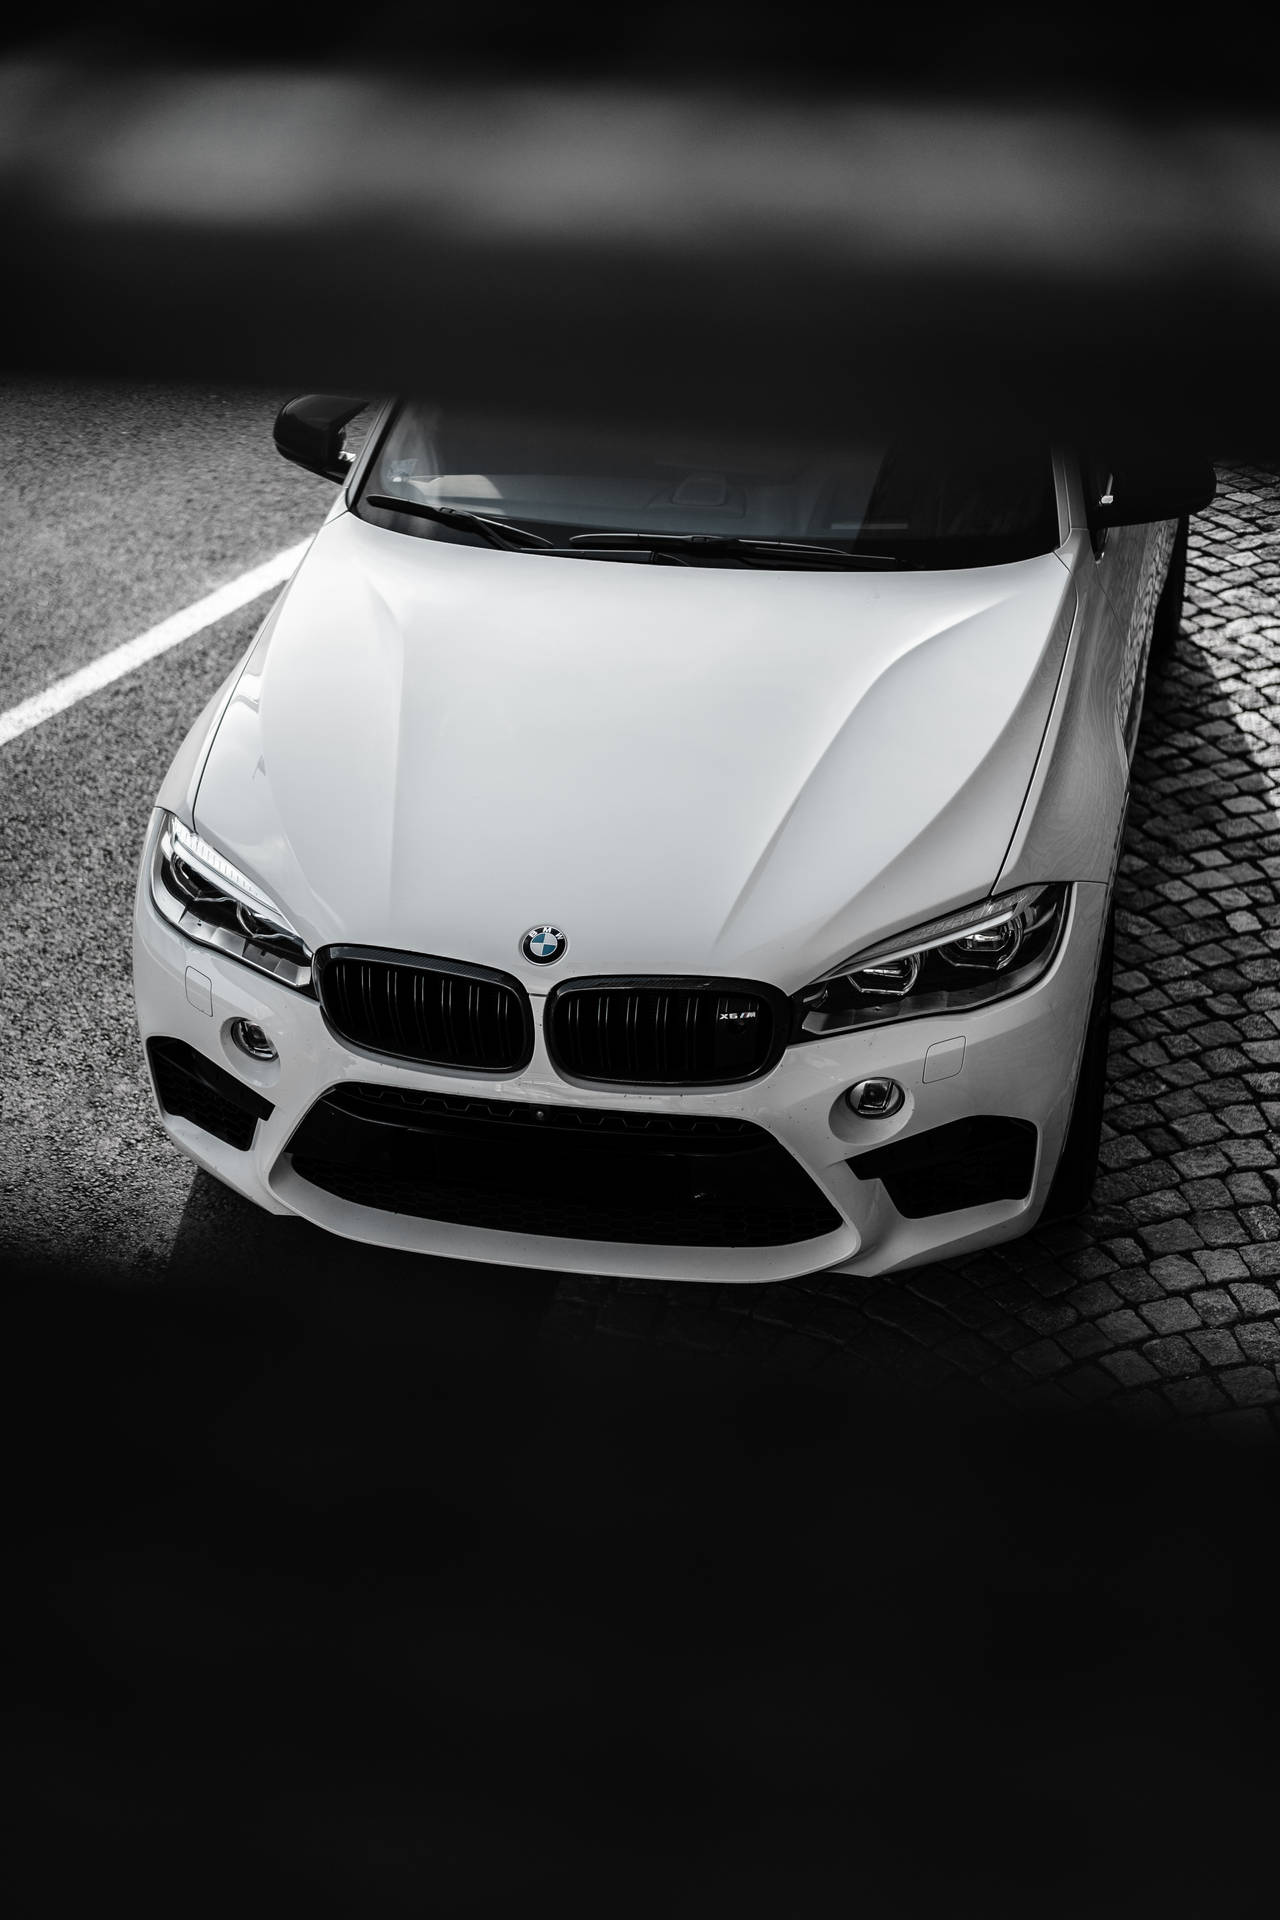 Caption: Exemplary Design And Unmatched Performance - Bmw M3 In Black And White